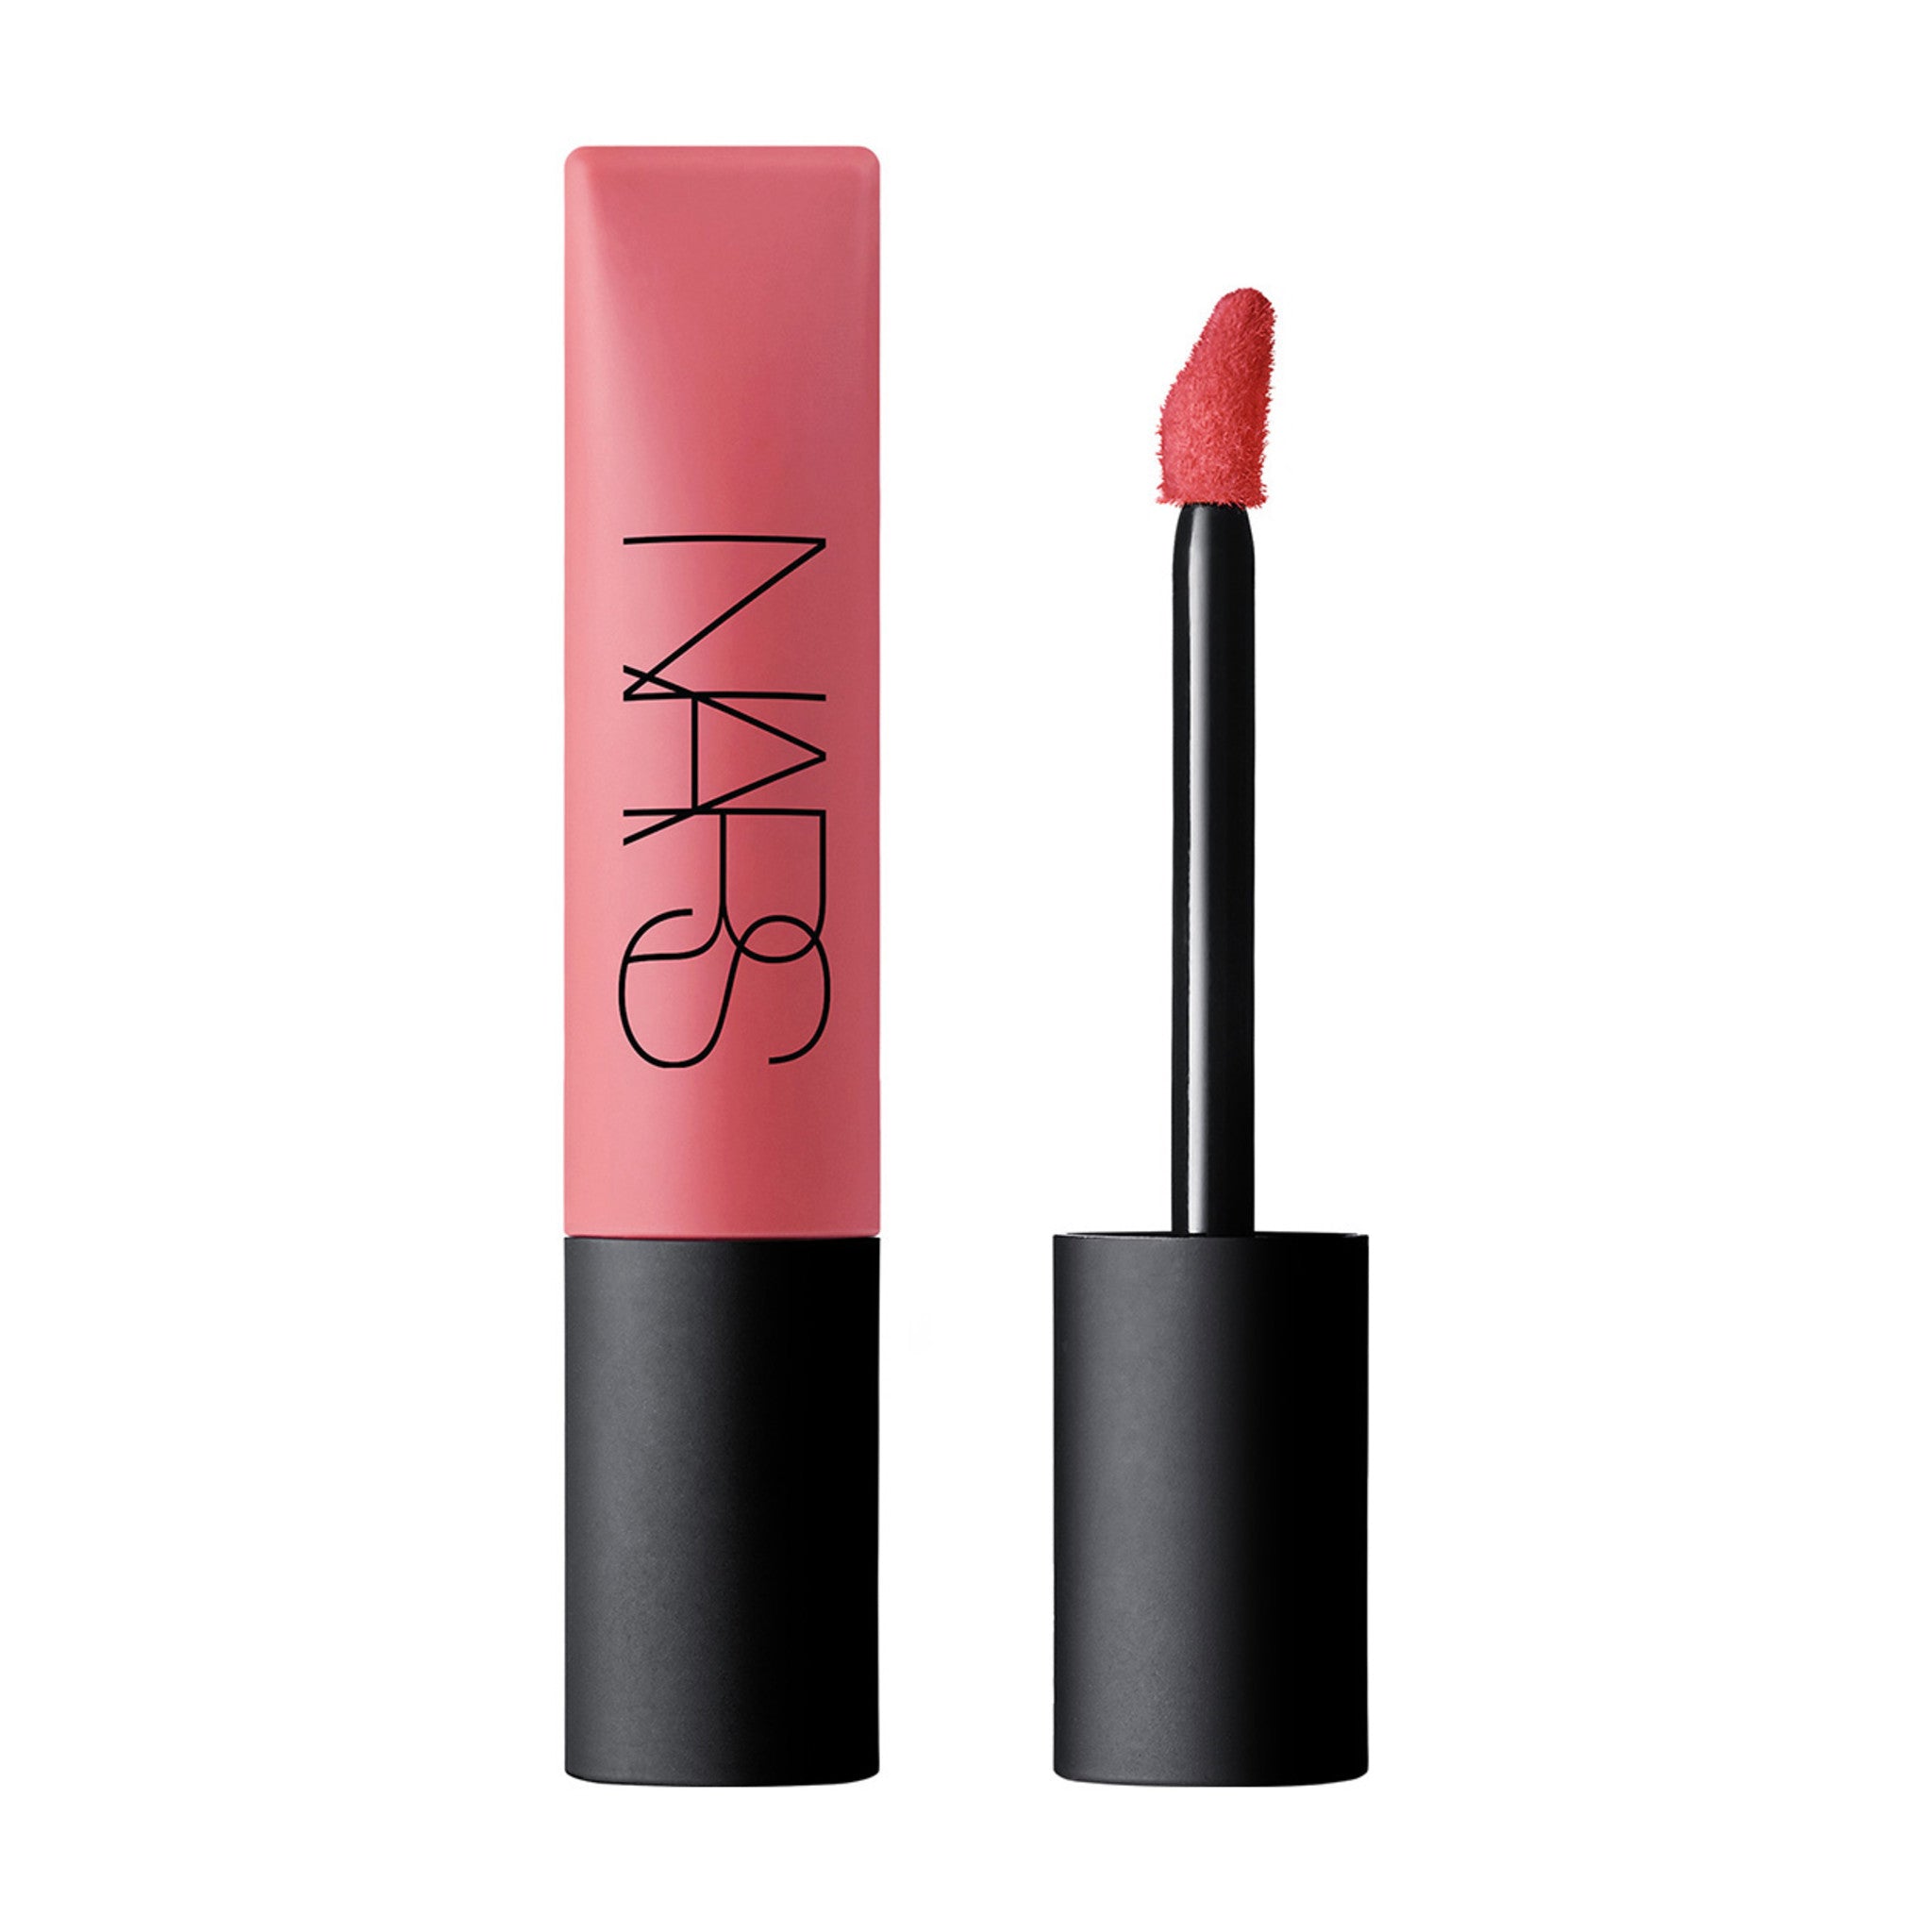 Limited edition Nars Air Matte Lip Color Color/Shade variant: Shag main image. This product is in the color nude